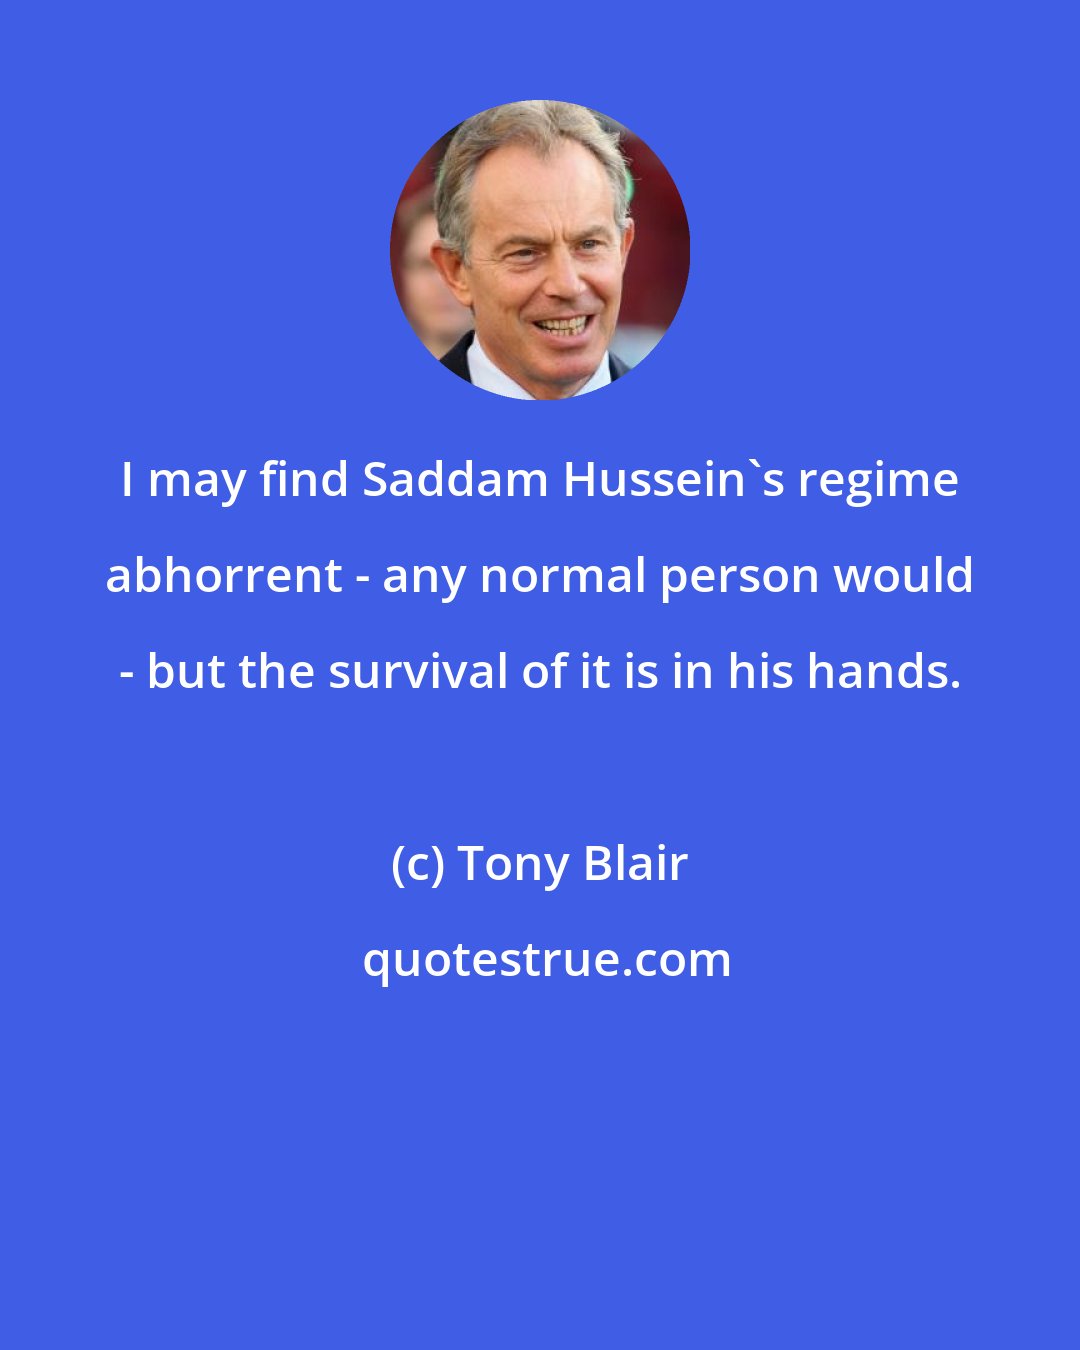 Tony Blair: I may find Saddam Hussein's regime abhorrent - any normal person would - but the survival of it is in his hands.